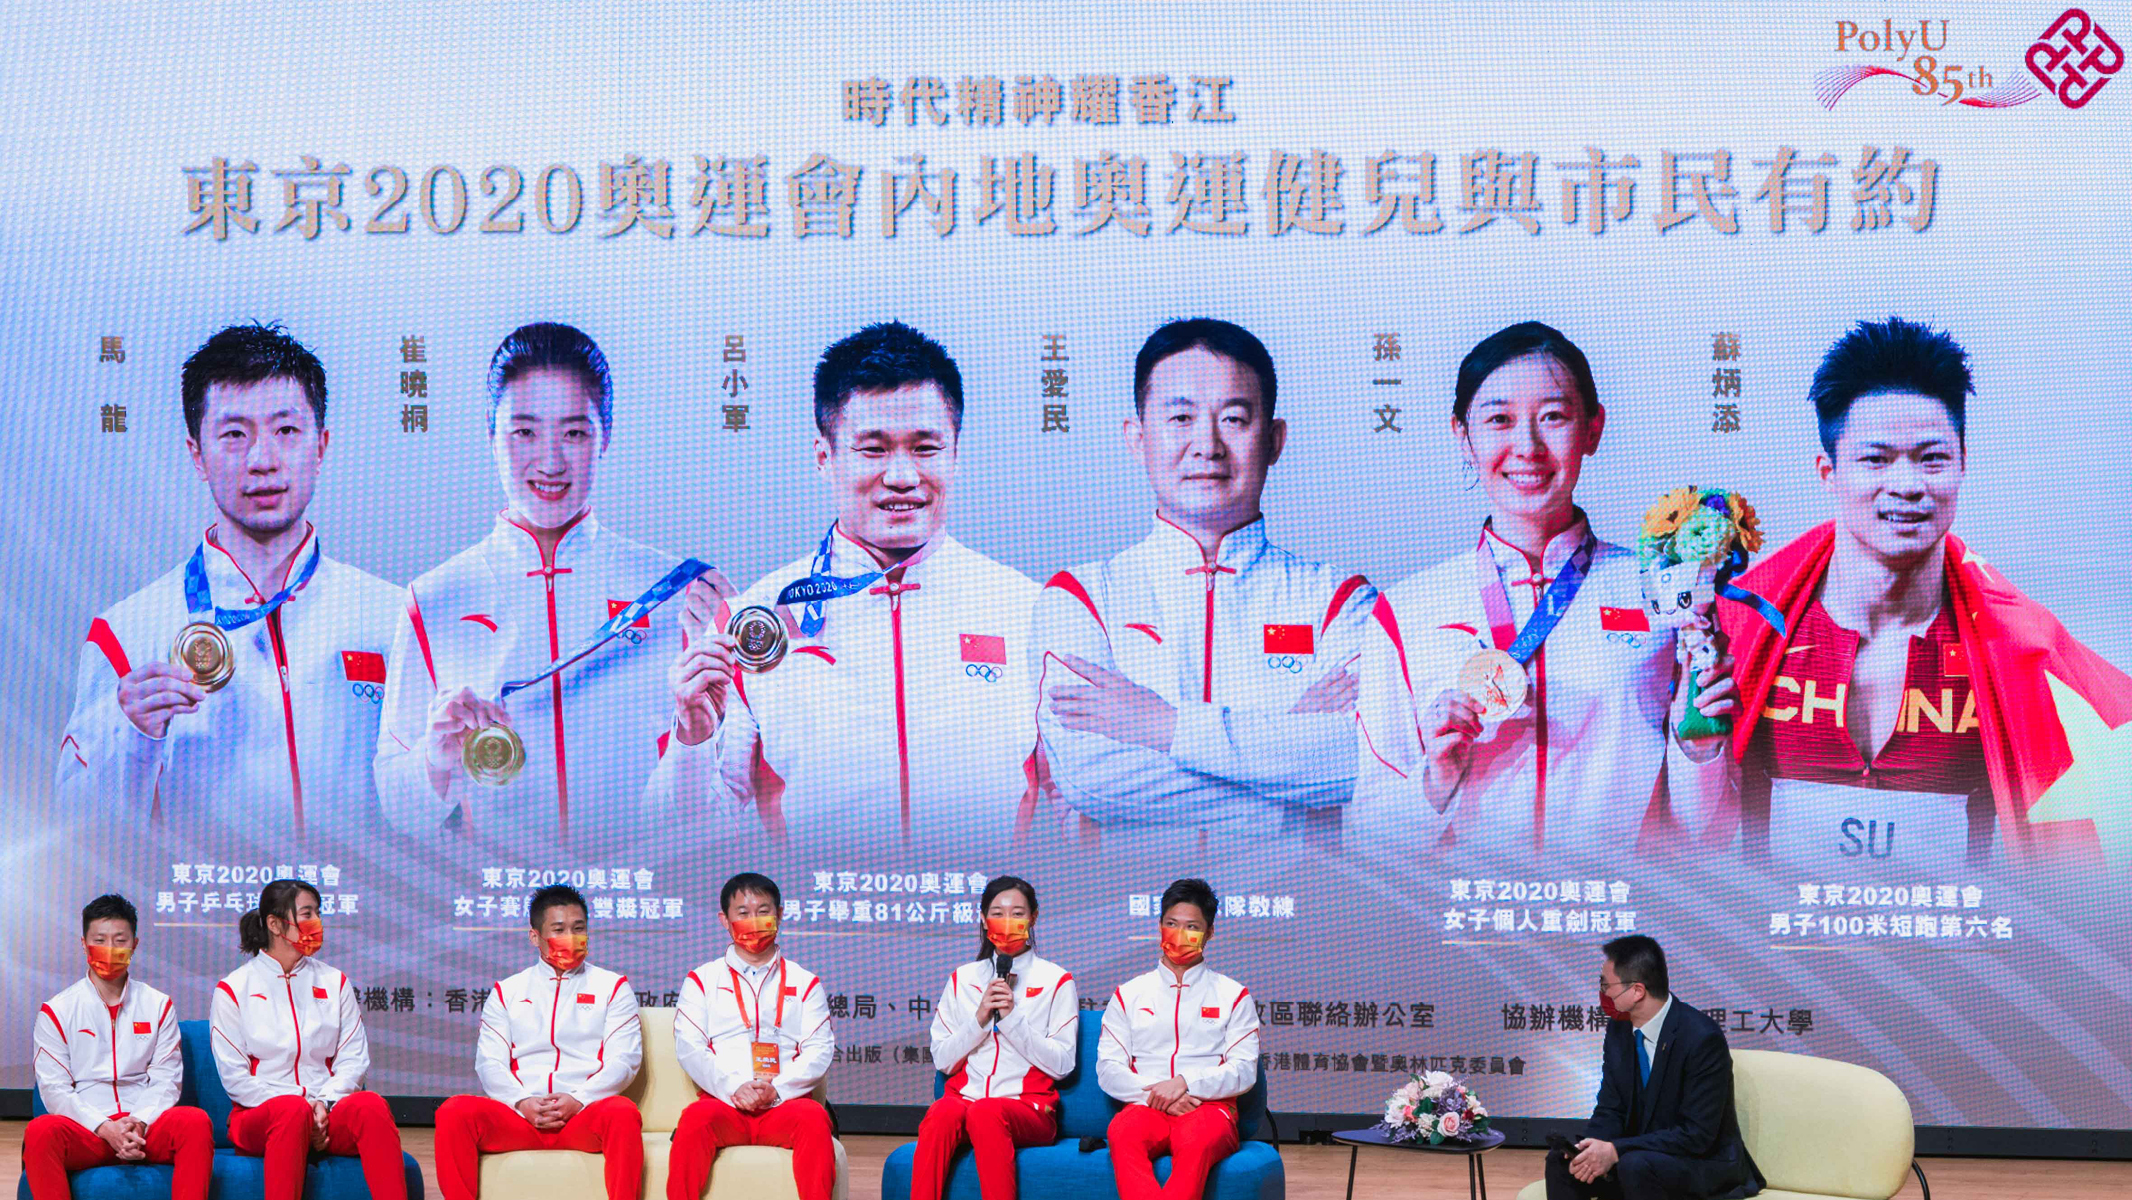 The Olympians chatted with the audience in the exchange portion of the meet-and-greet session moderated byProfessor Lu Haitian, PolyU’s Director of Mainland Development (right).